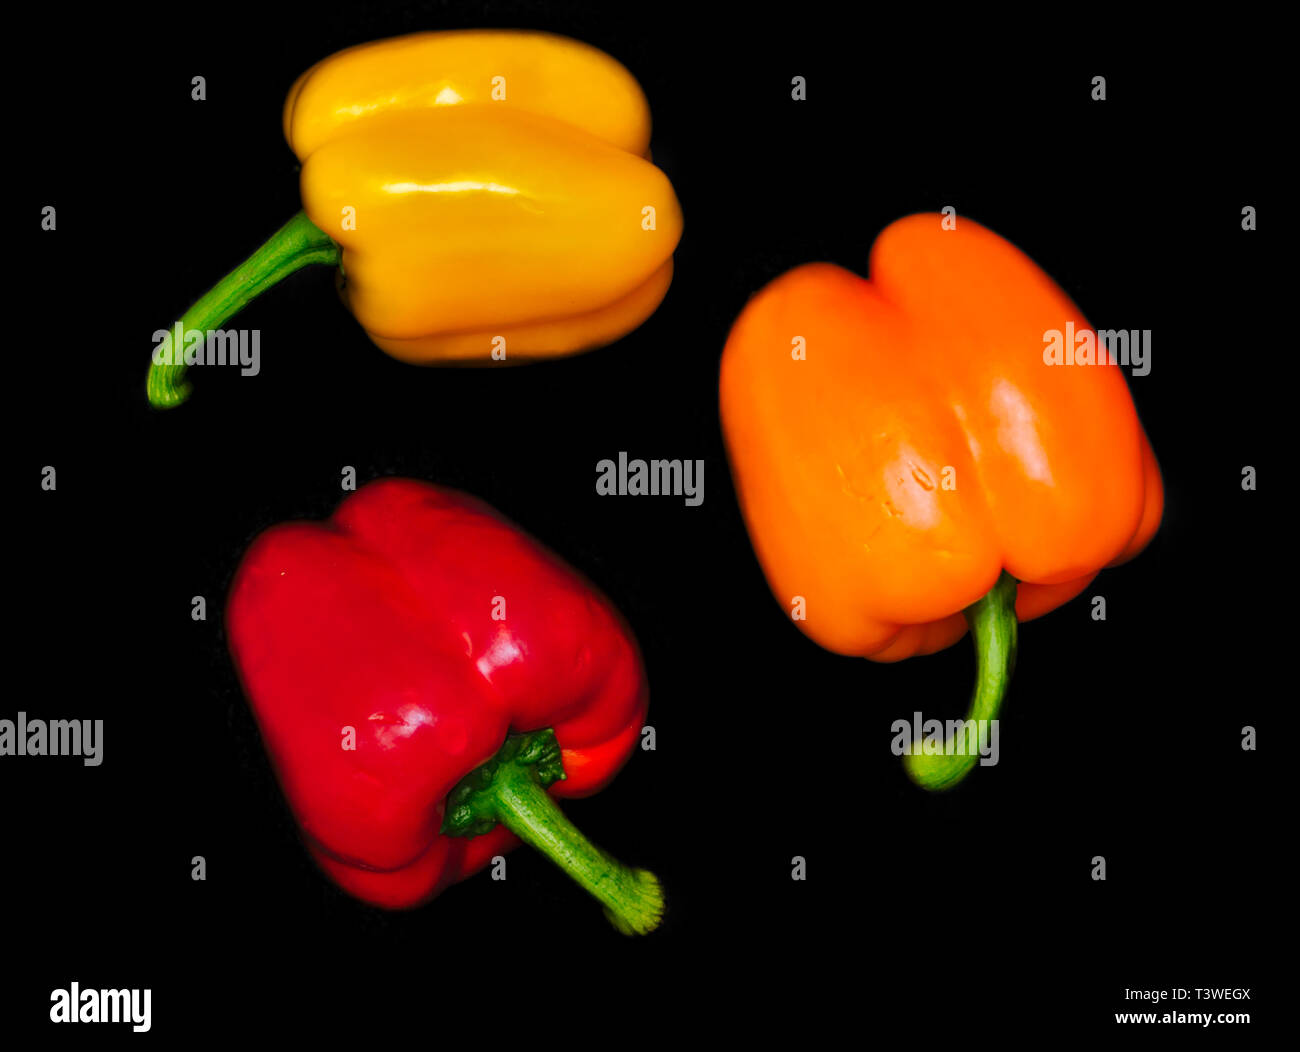 Vivid colorful shiny peppers on black background. Vegetables forming a circle. Red yellow and orange vibrant colors. Stock Photo